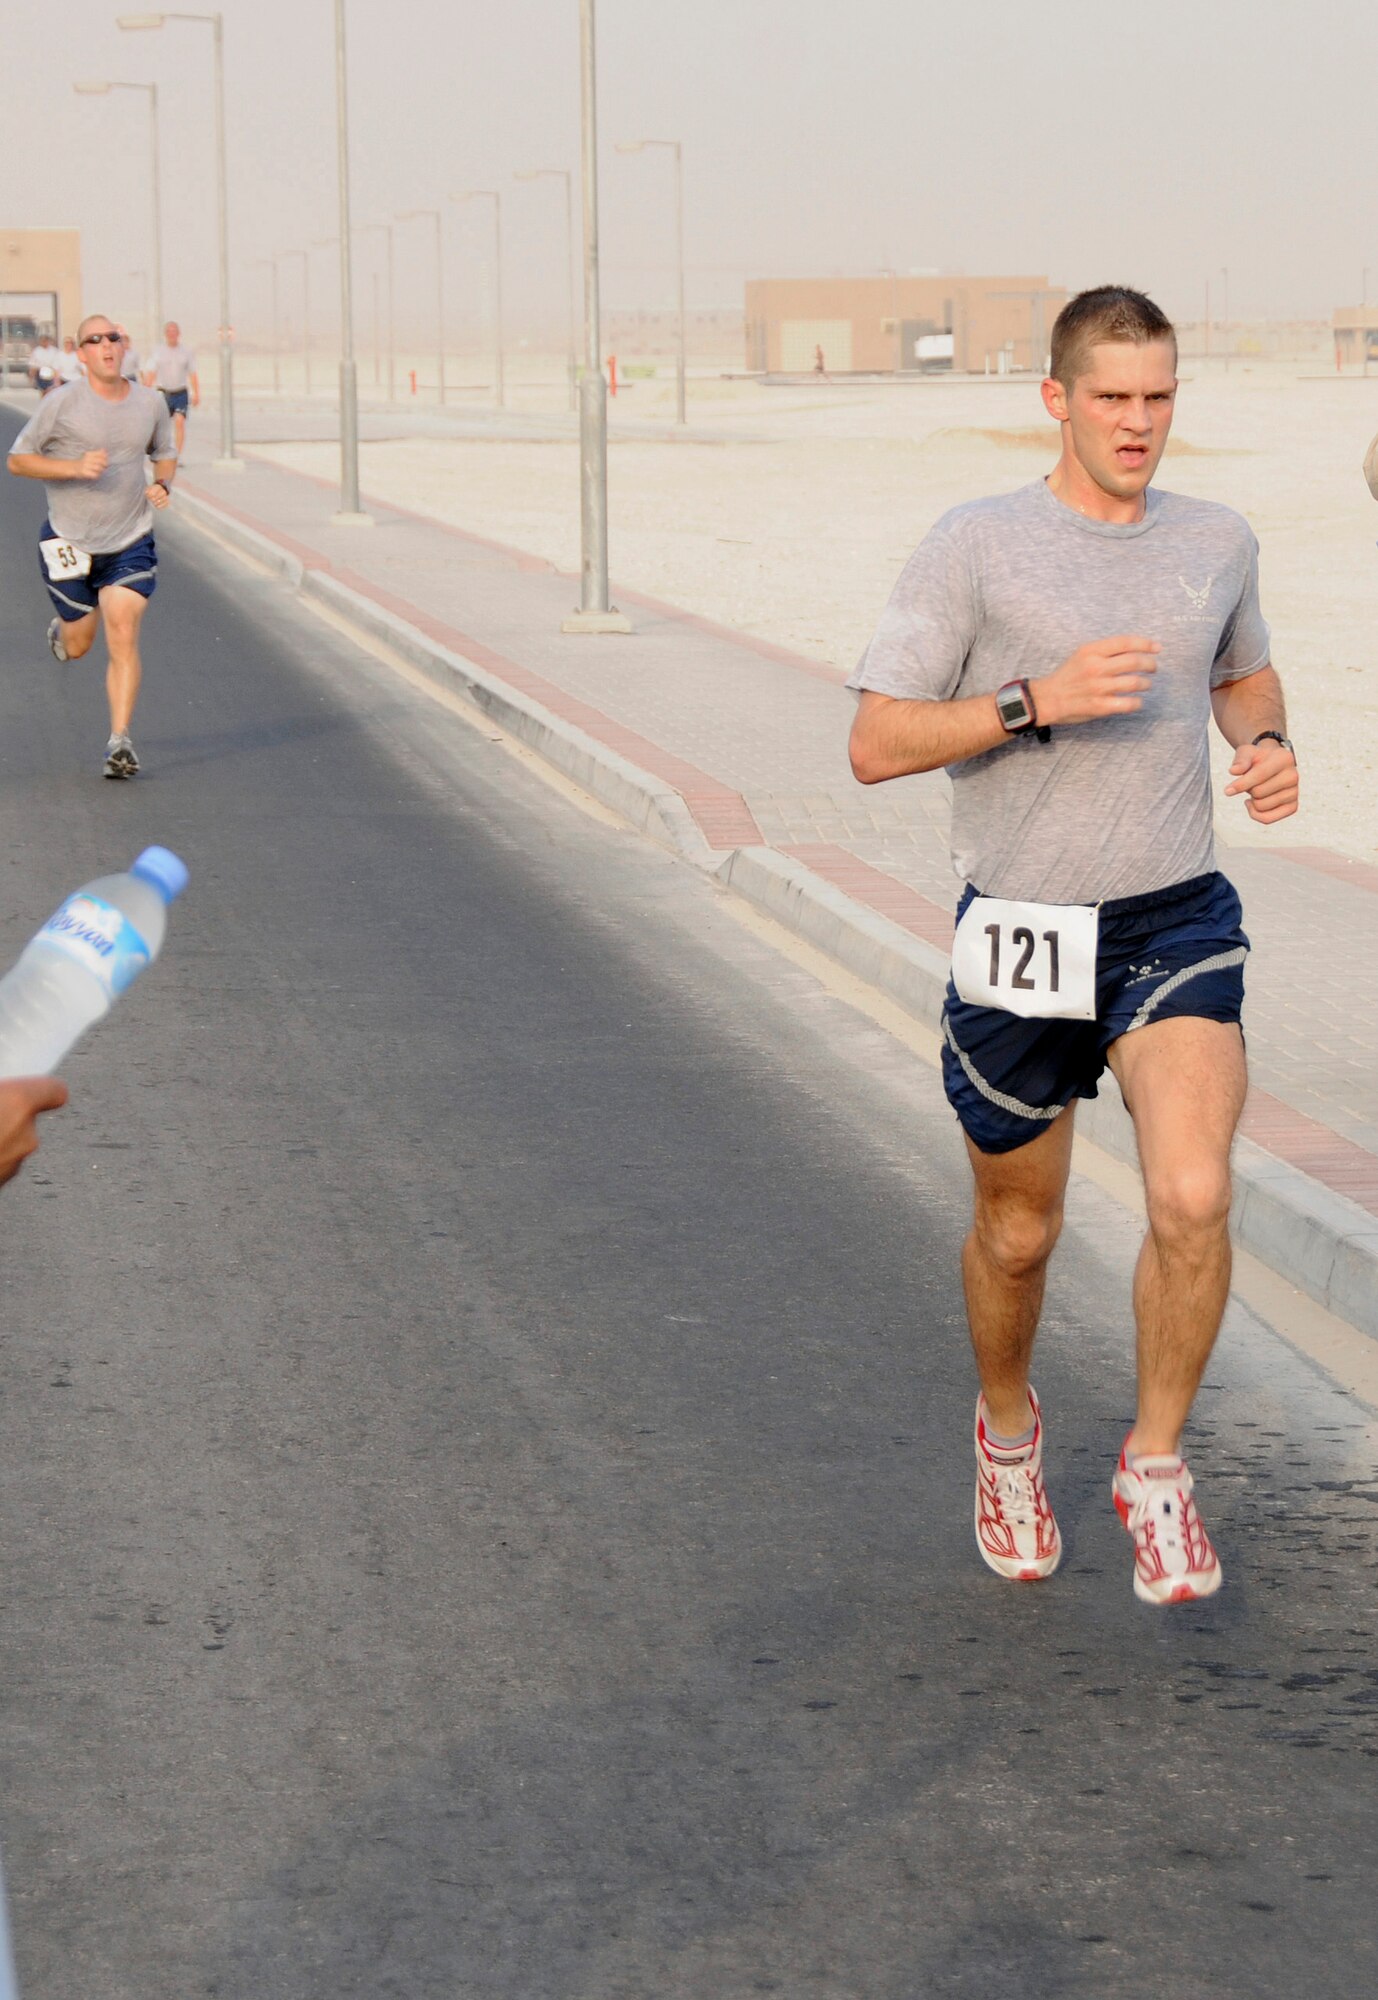 Capt. Michael Lilly, Combined Air and Space Operations Center finishes strong in the “Run for the Fallen 5K” sponsored by the 379th Expeditionary Force Support Squadron Sunday, Aug. 17, 2008, at an undisclosed air base in Southwest Asia.  183 runners from the Army, Navy, Air Force and Marines as well as coalition partners participated in the run honoring those who have made the ultimate sacrifice in the Global War on Terrorism. (U.S. Air Force photo by Tech. Sgt. Michael Boquette/Released)